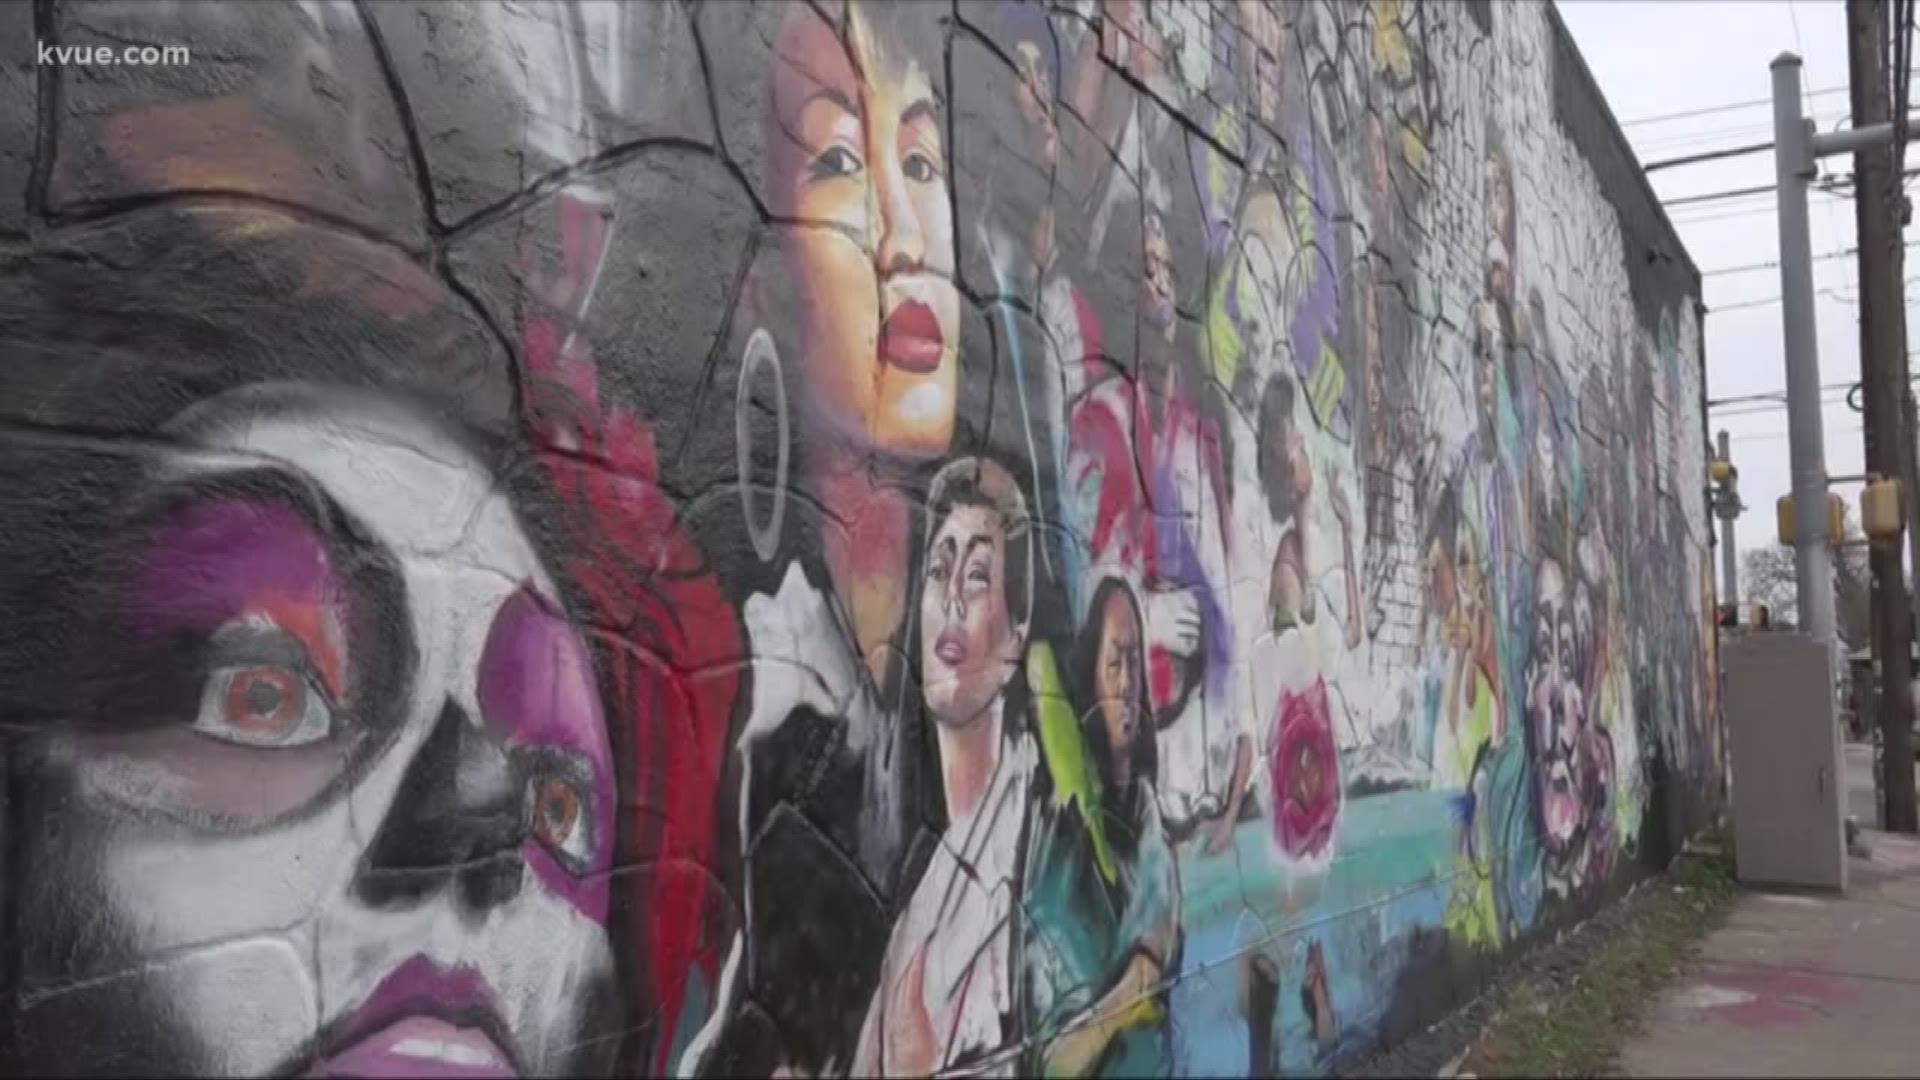 In May of last year, a beloved mural in east Austin was painted over. Now the artist who painted the original work is putting another in its place.